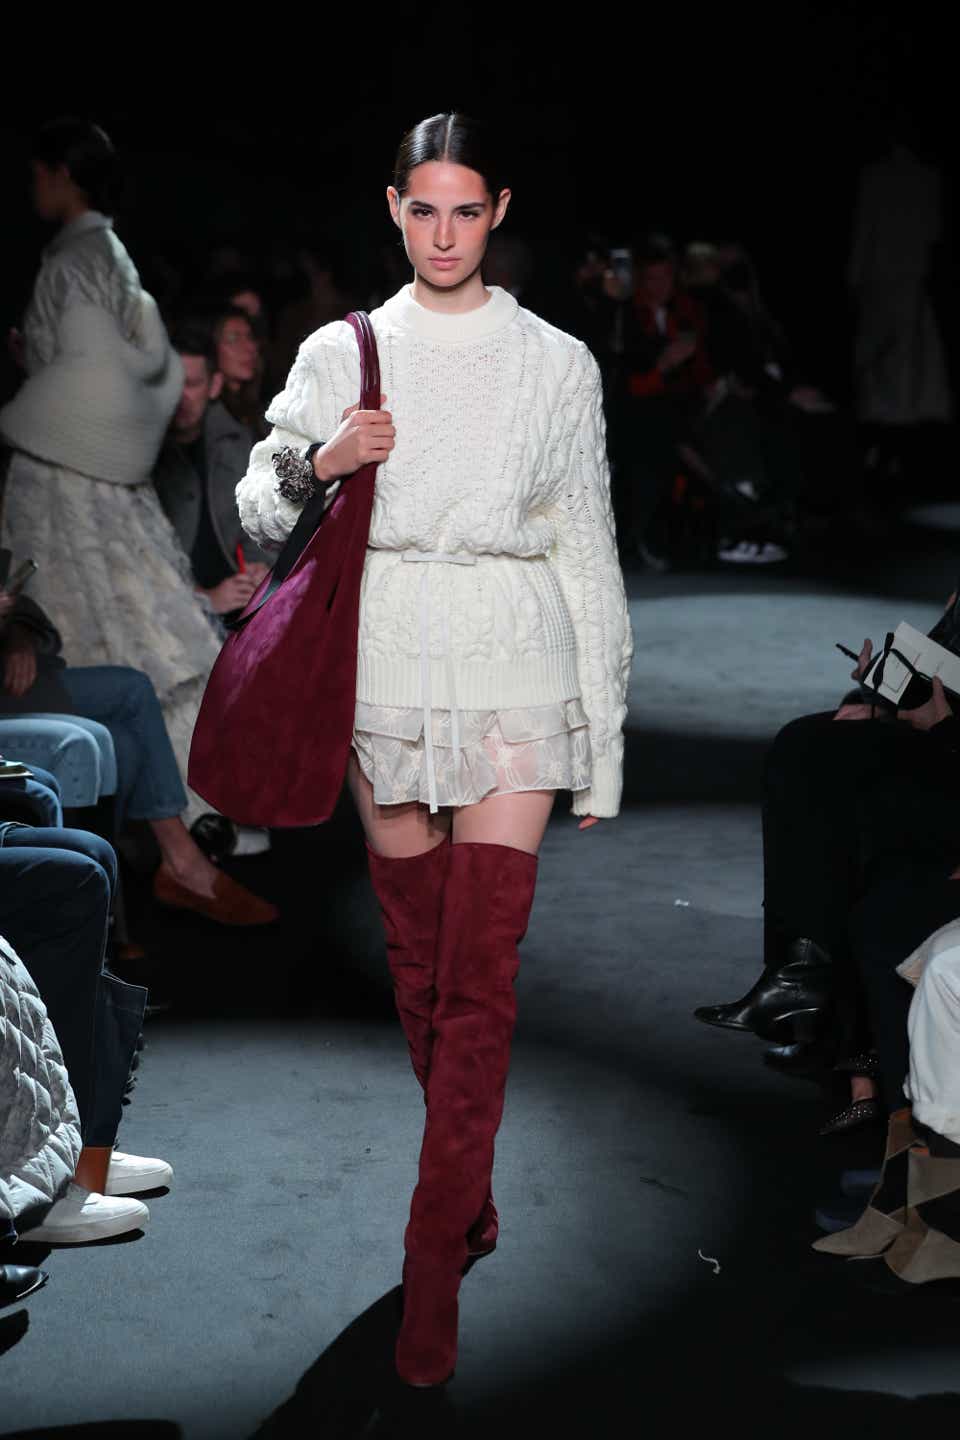 A model wearing a cable knit white sweater cinched at the waist at the Brandon Maxwell Fall 2022 runway.